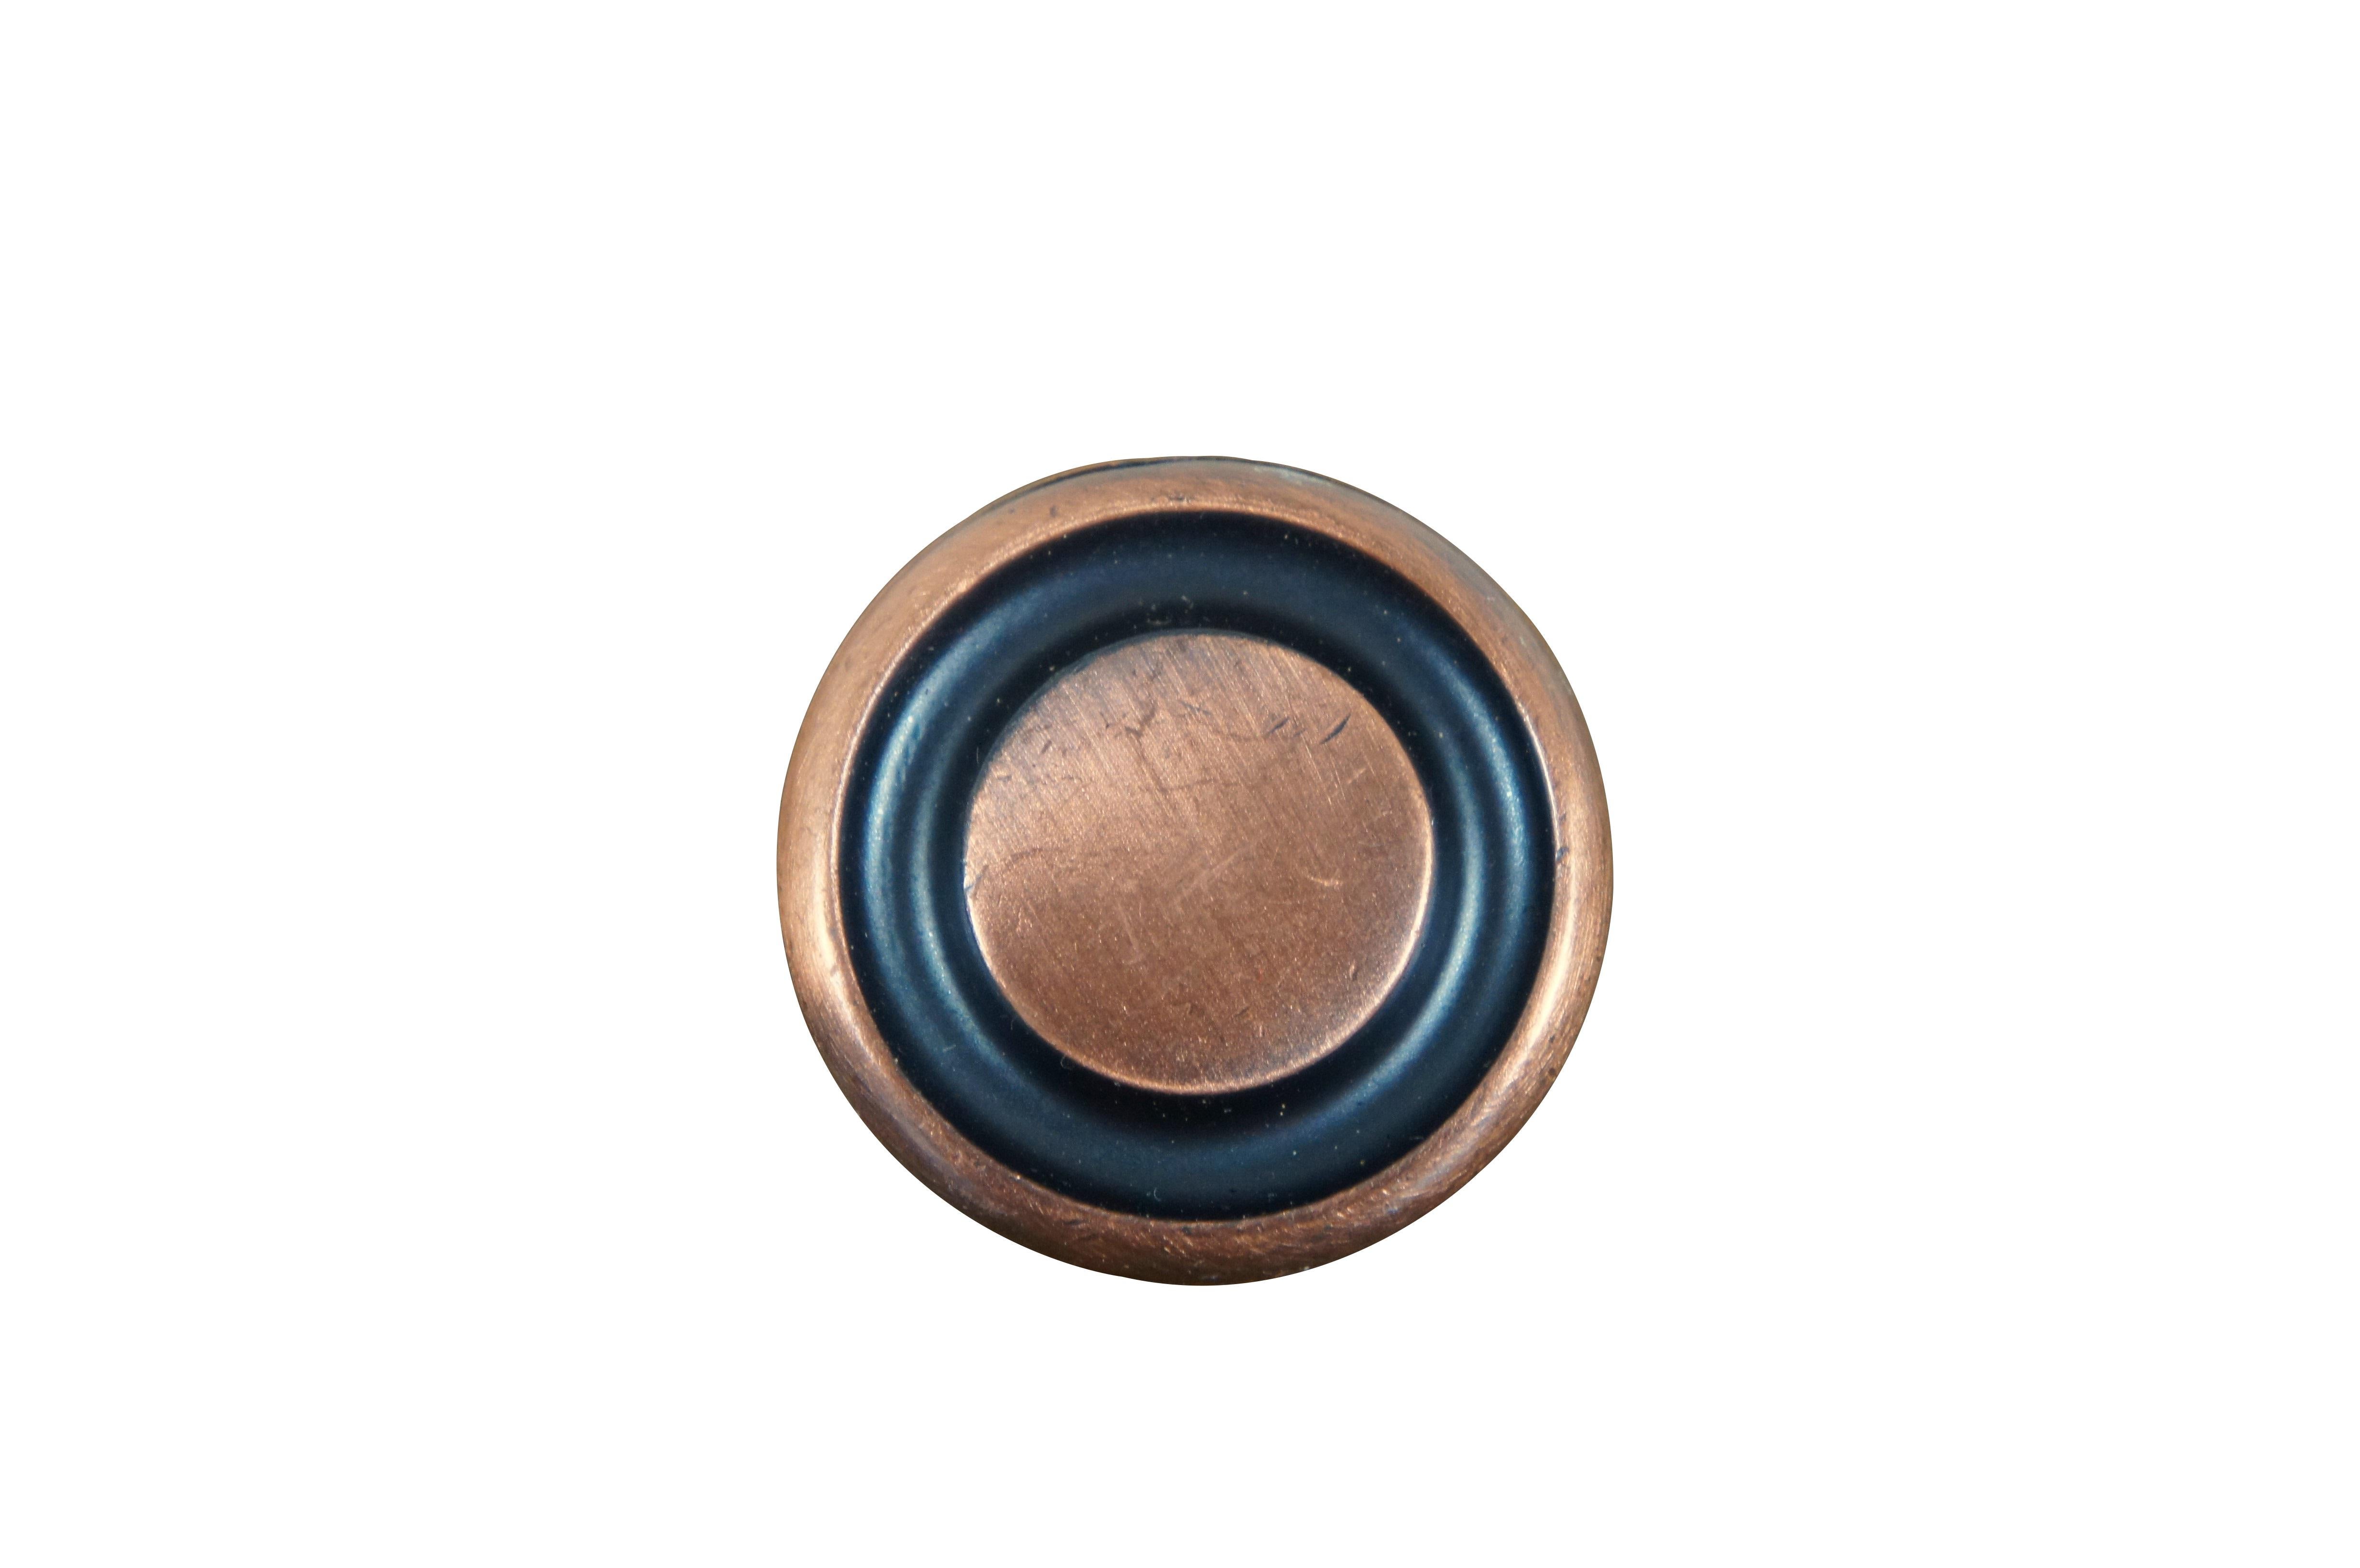 4 Available - Mid to late 20th century old-stock drawer / cabinet pulls. National Lock Company - Medalist, item number C275-10D Knob, Old Copper.  Round button shape with dark, recessed groove.

Dimensions:
1.375